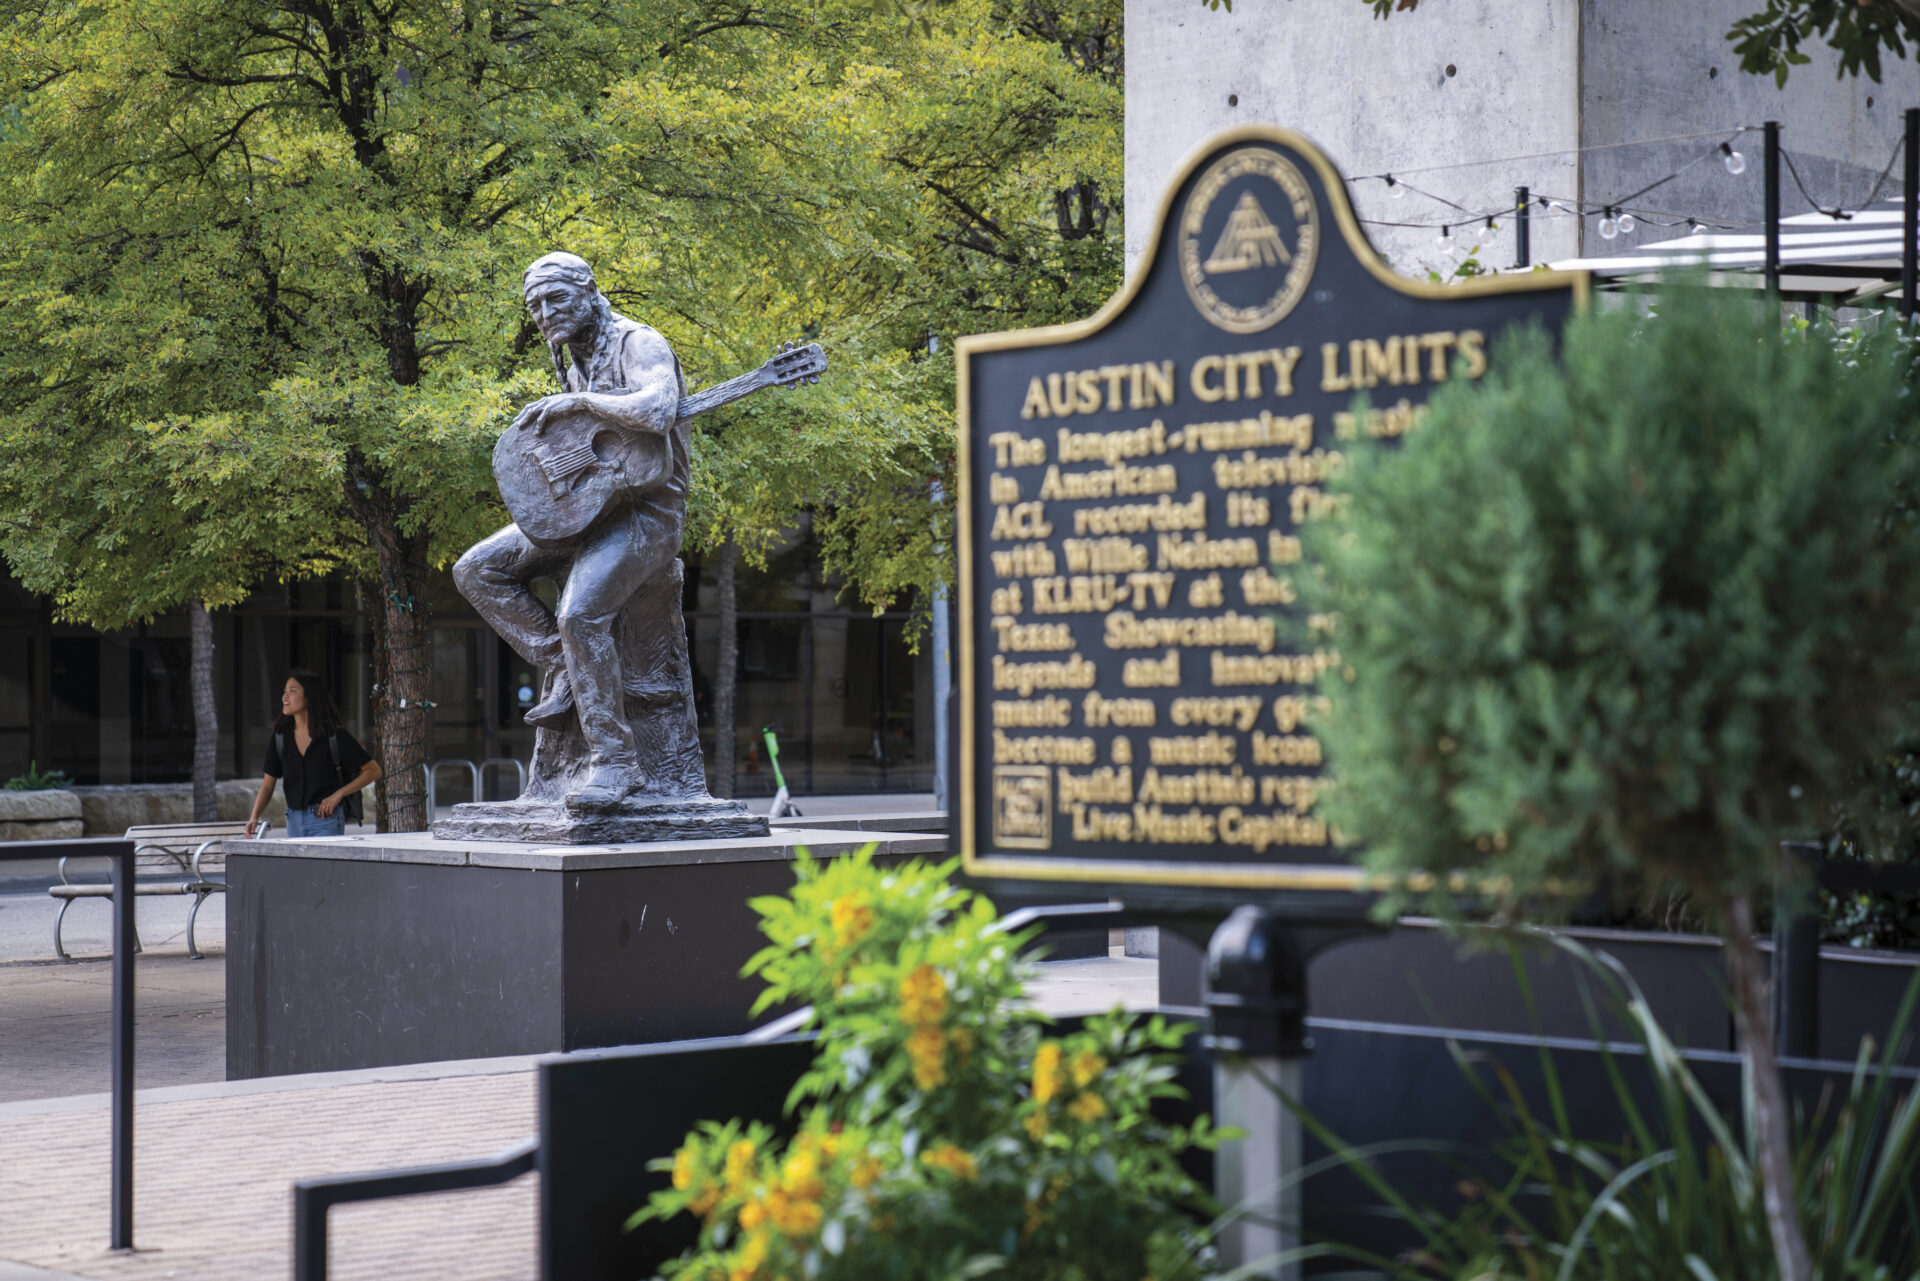 Statue of Willie Nelson with Austin City Limits sign with trees and plants in fram